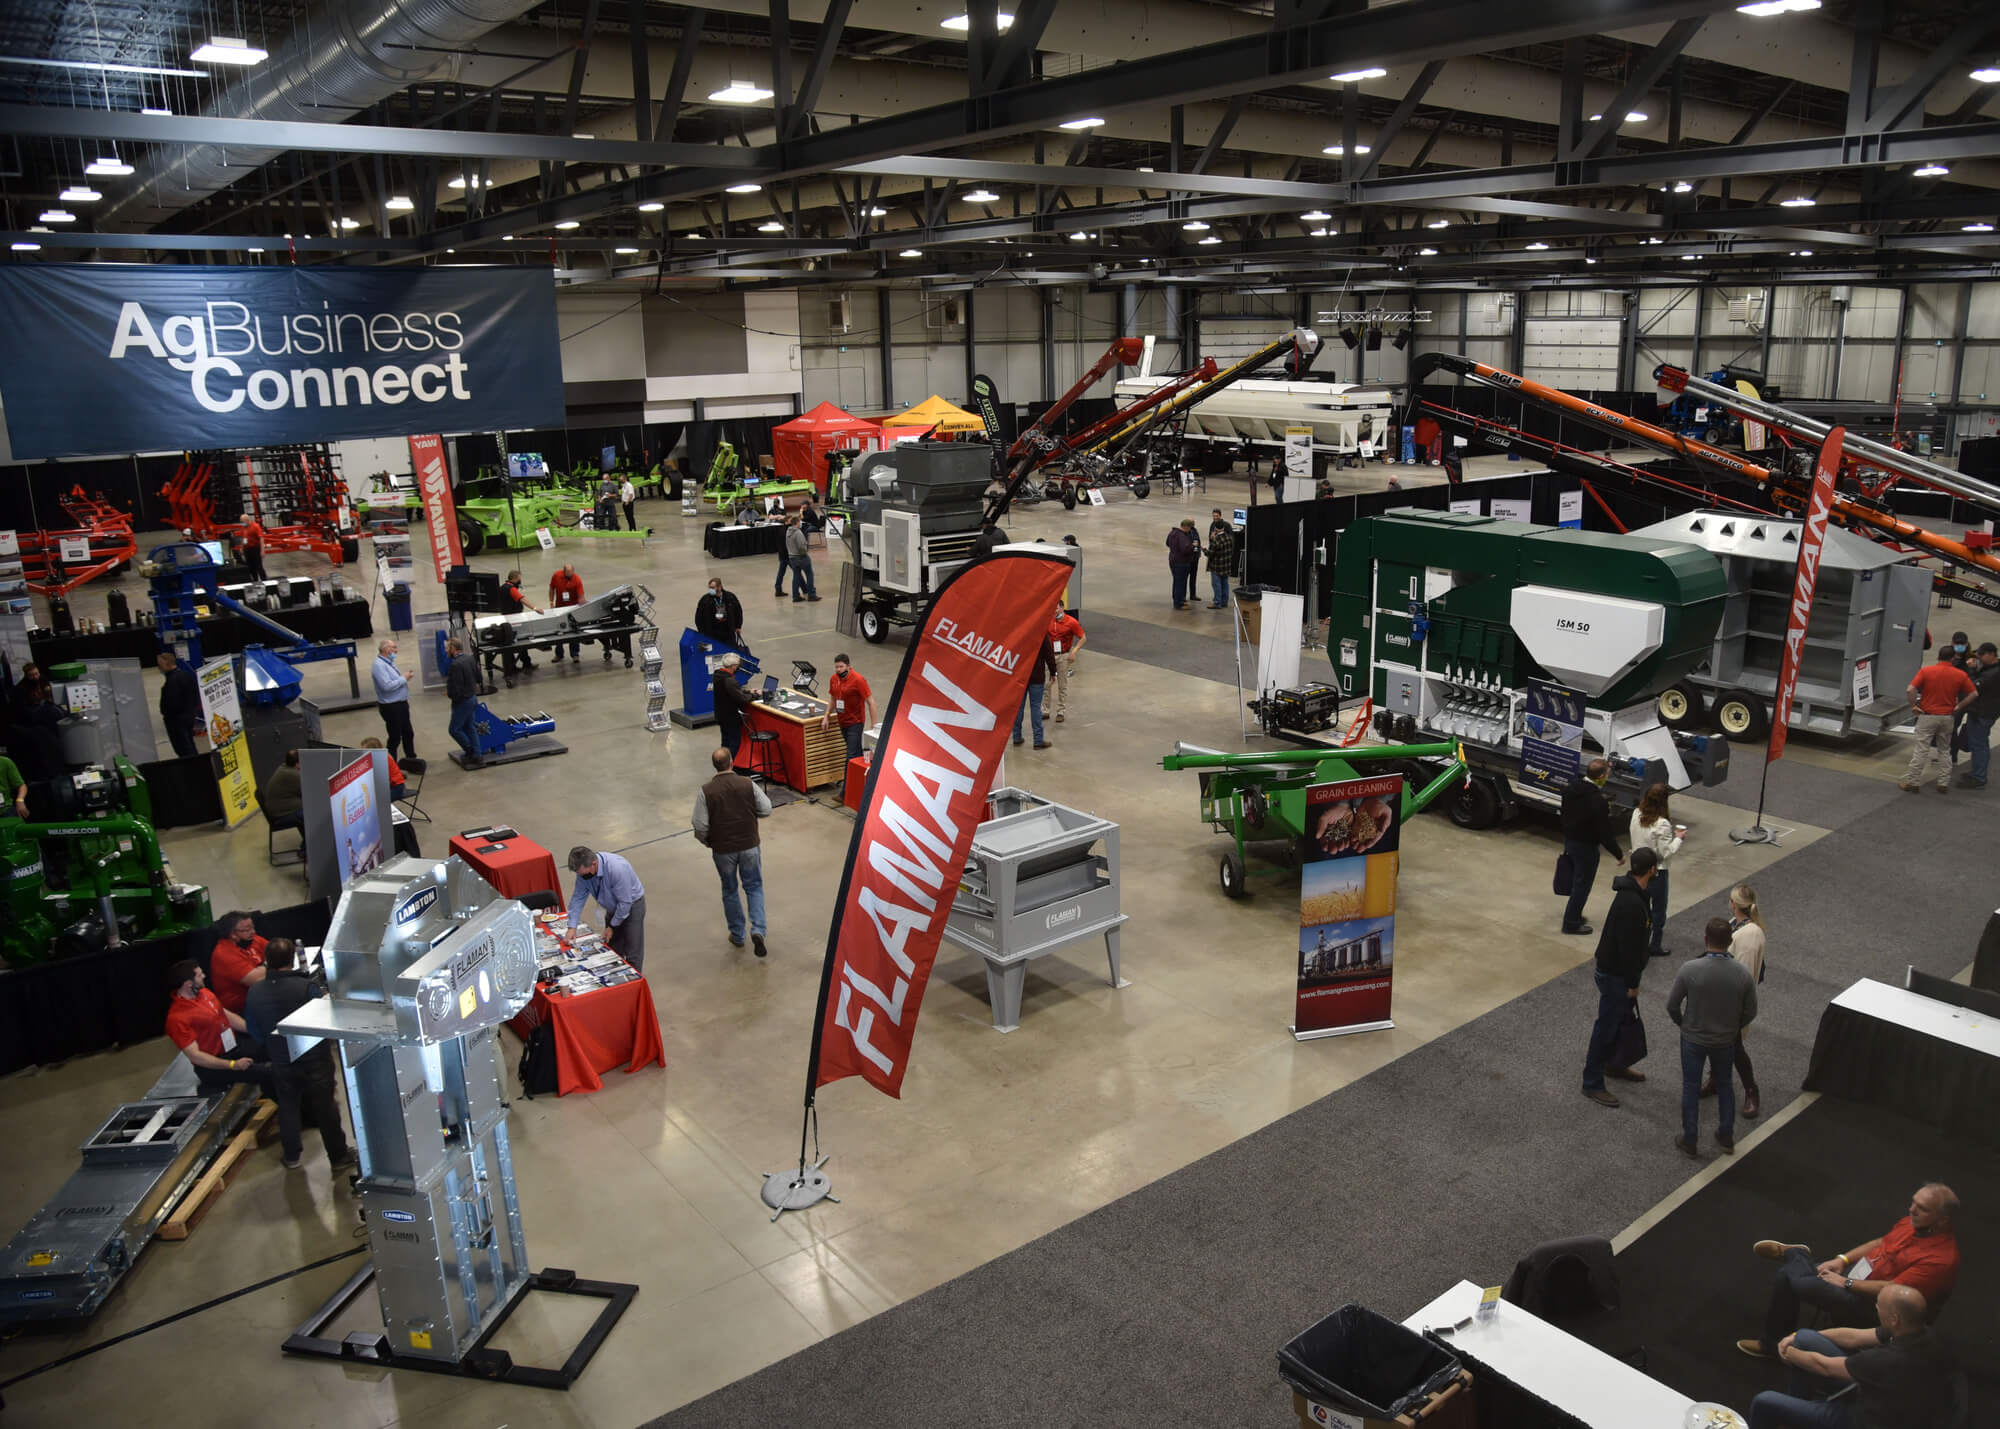 Overview of the exhibitor hall at Canada's Farm Show